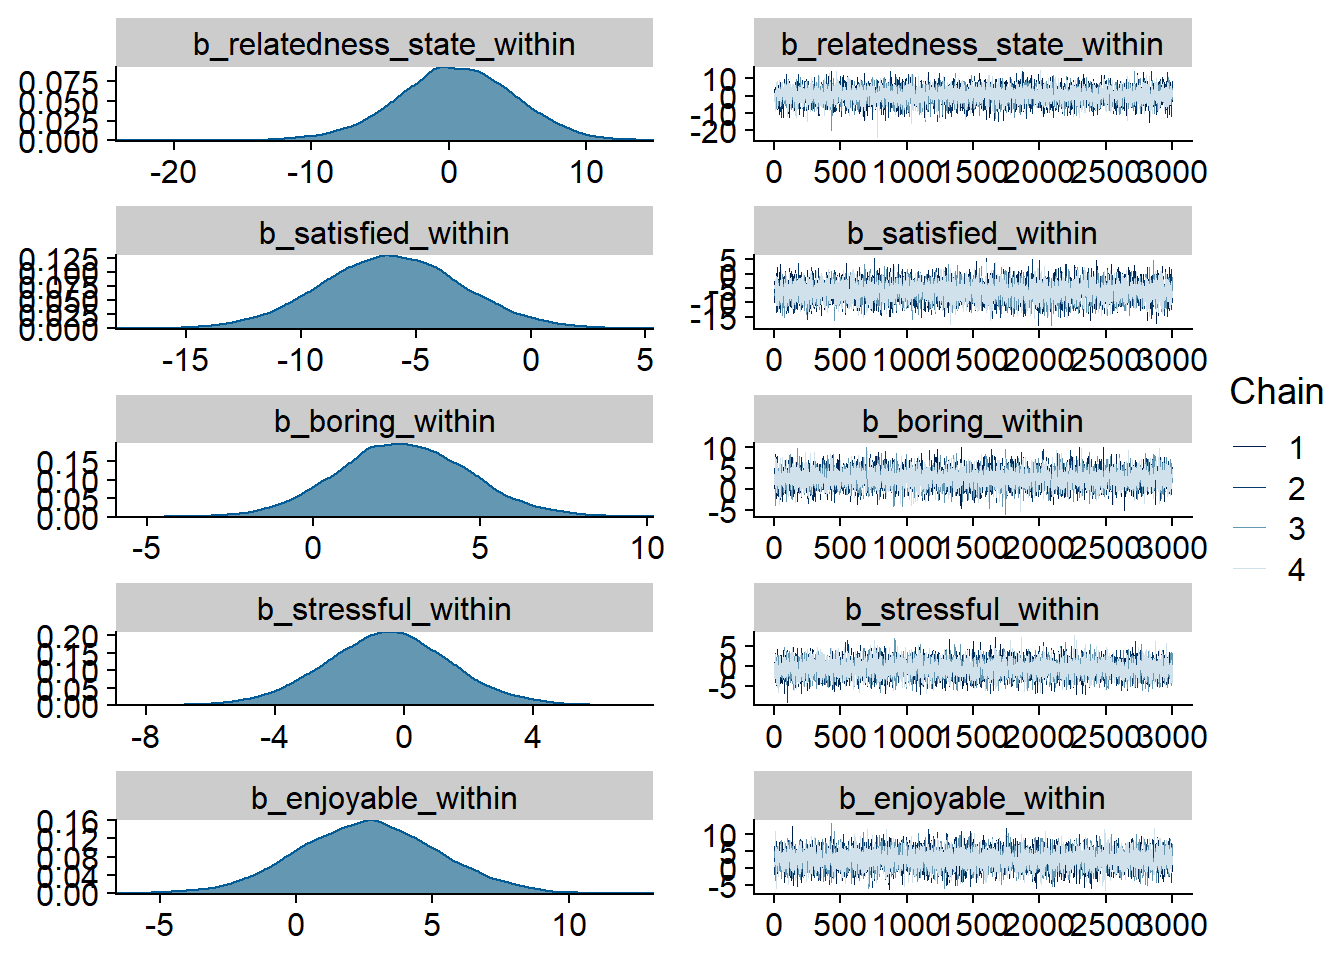 Traceplots and posterior distributions for Model 6